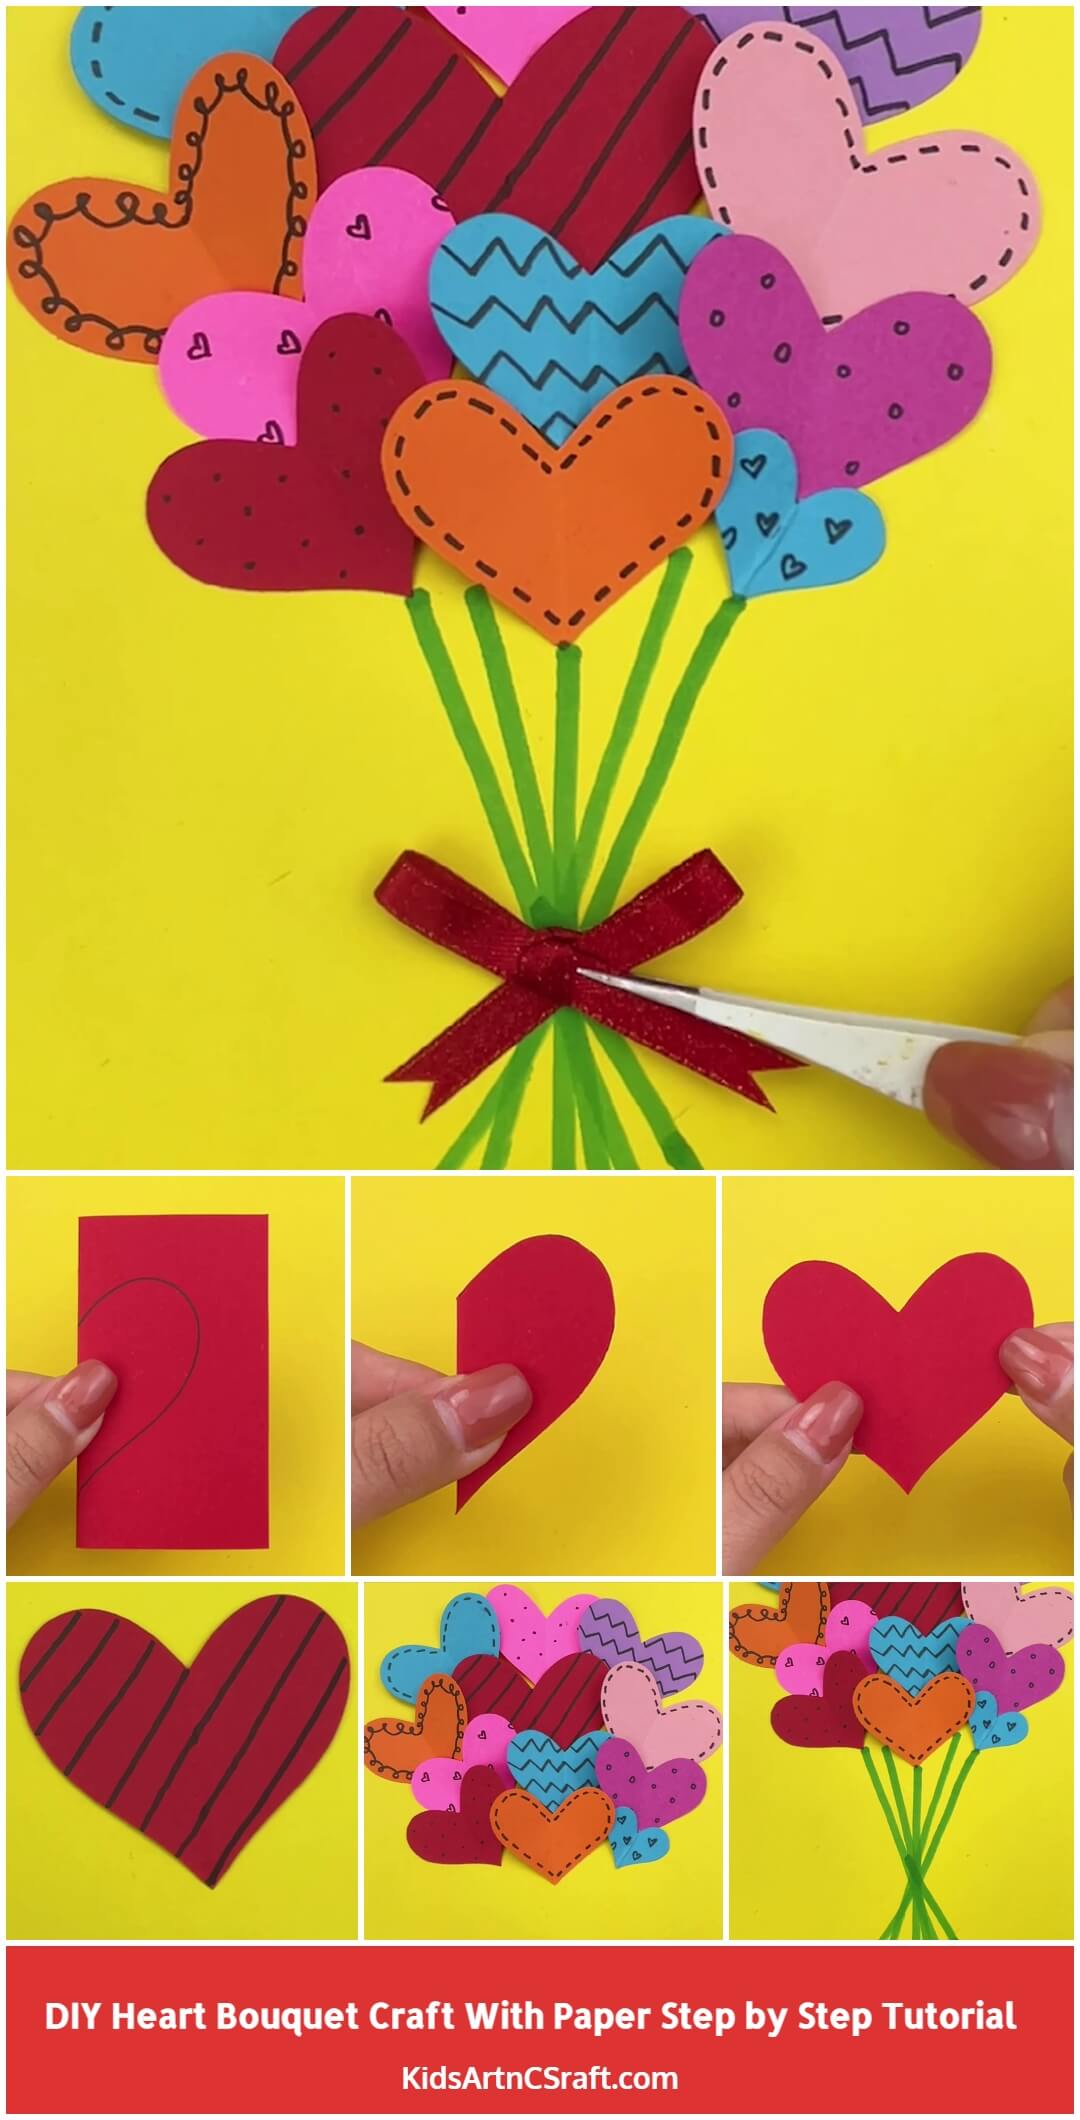 DIY Heart Bouquet With Paper Art & Craft Step by Step Tutorial